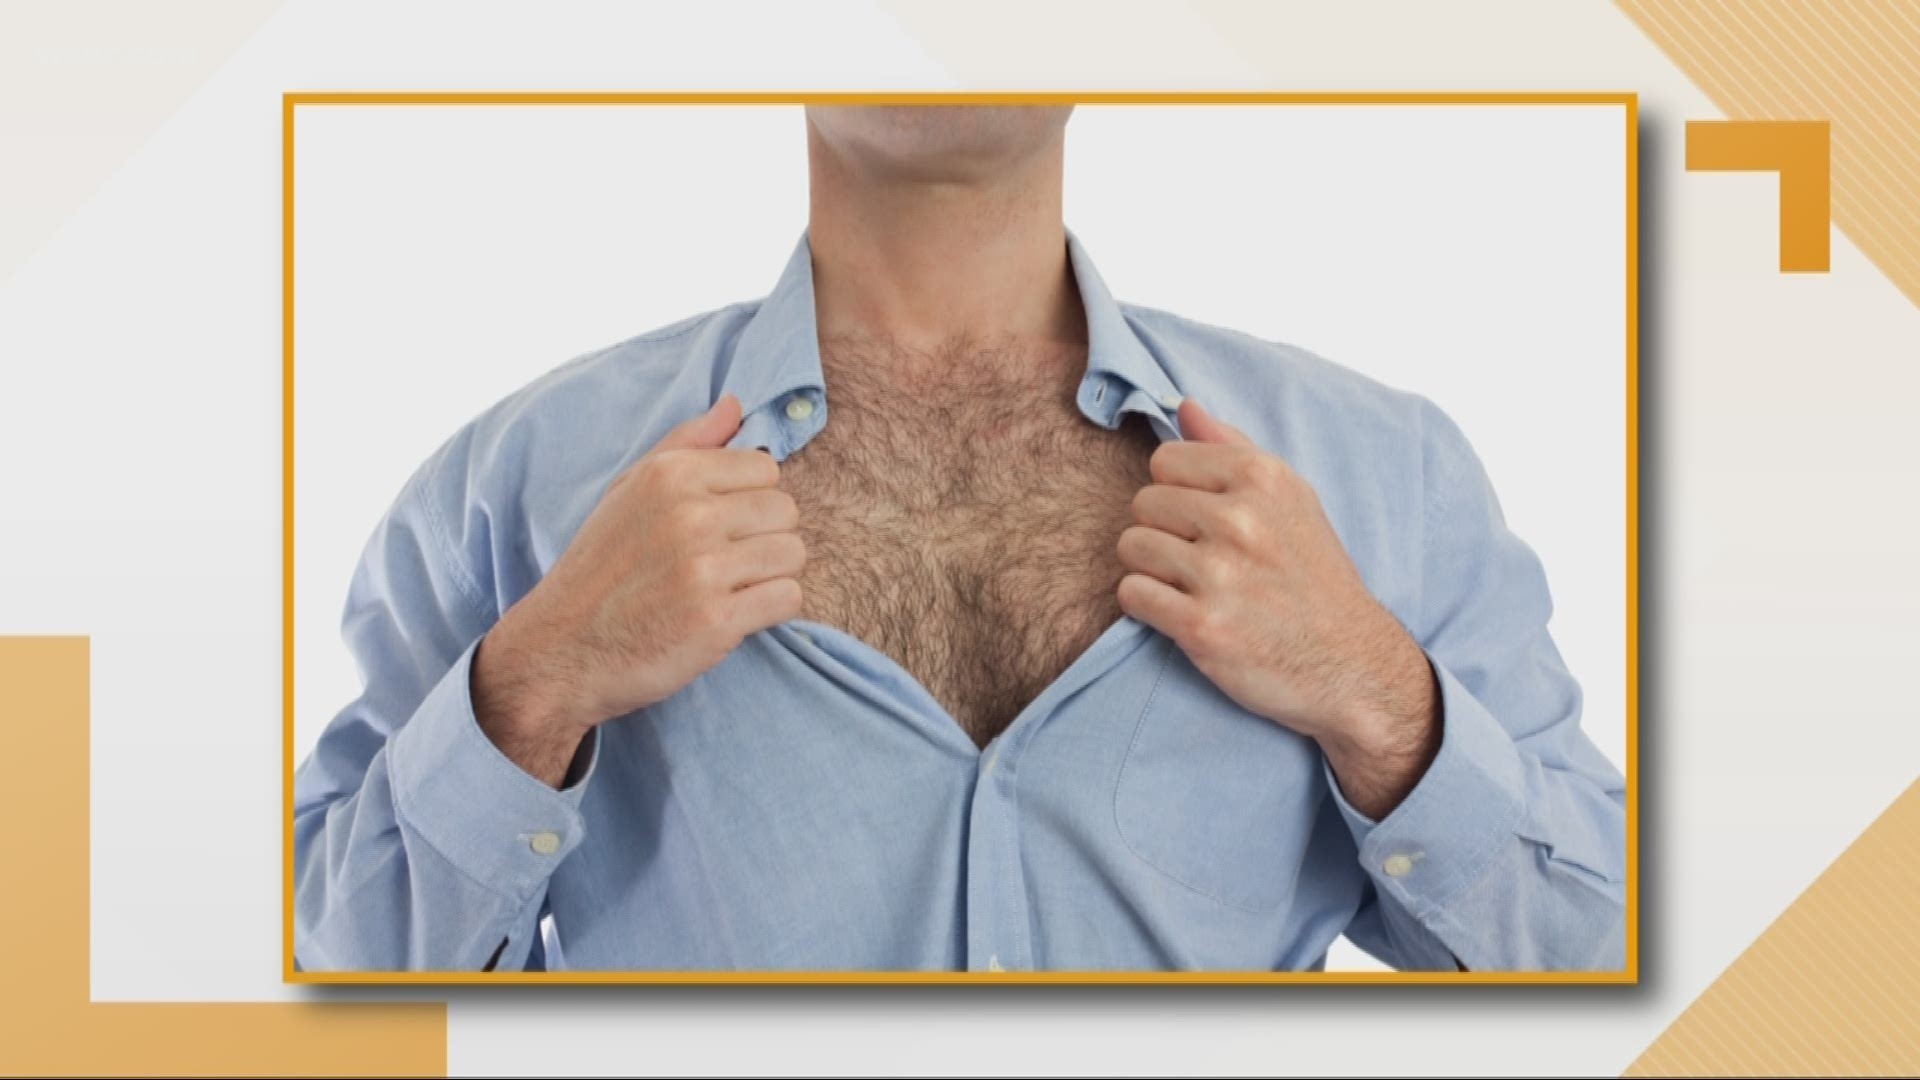 55% of men are embarrassed by their body hair, survey finds 